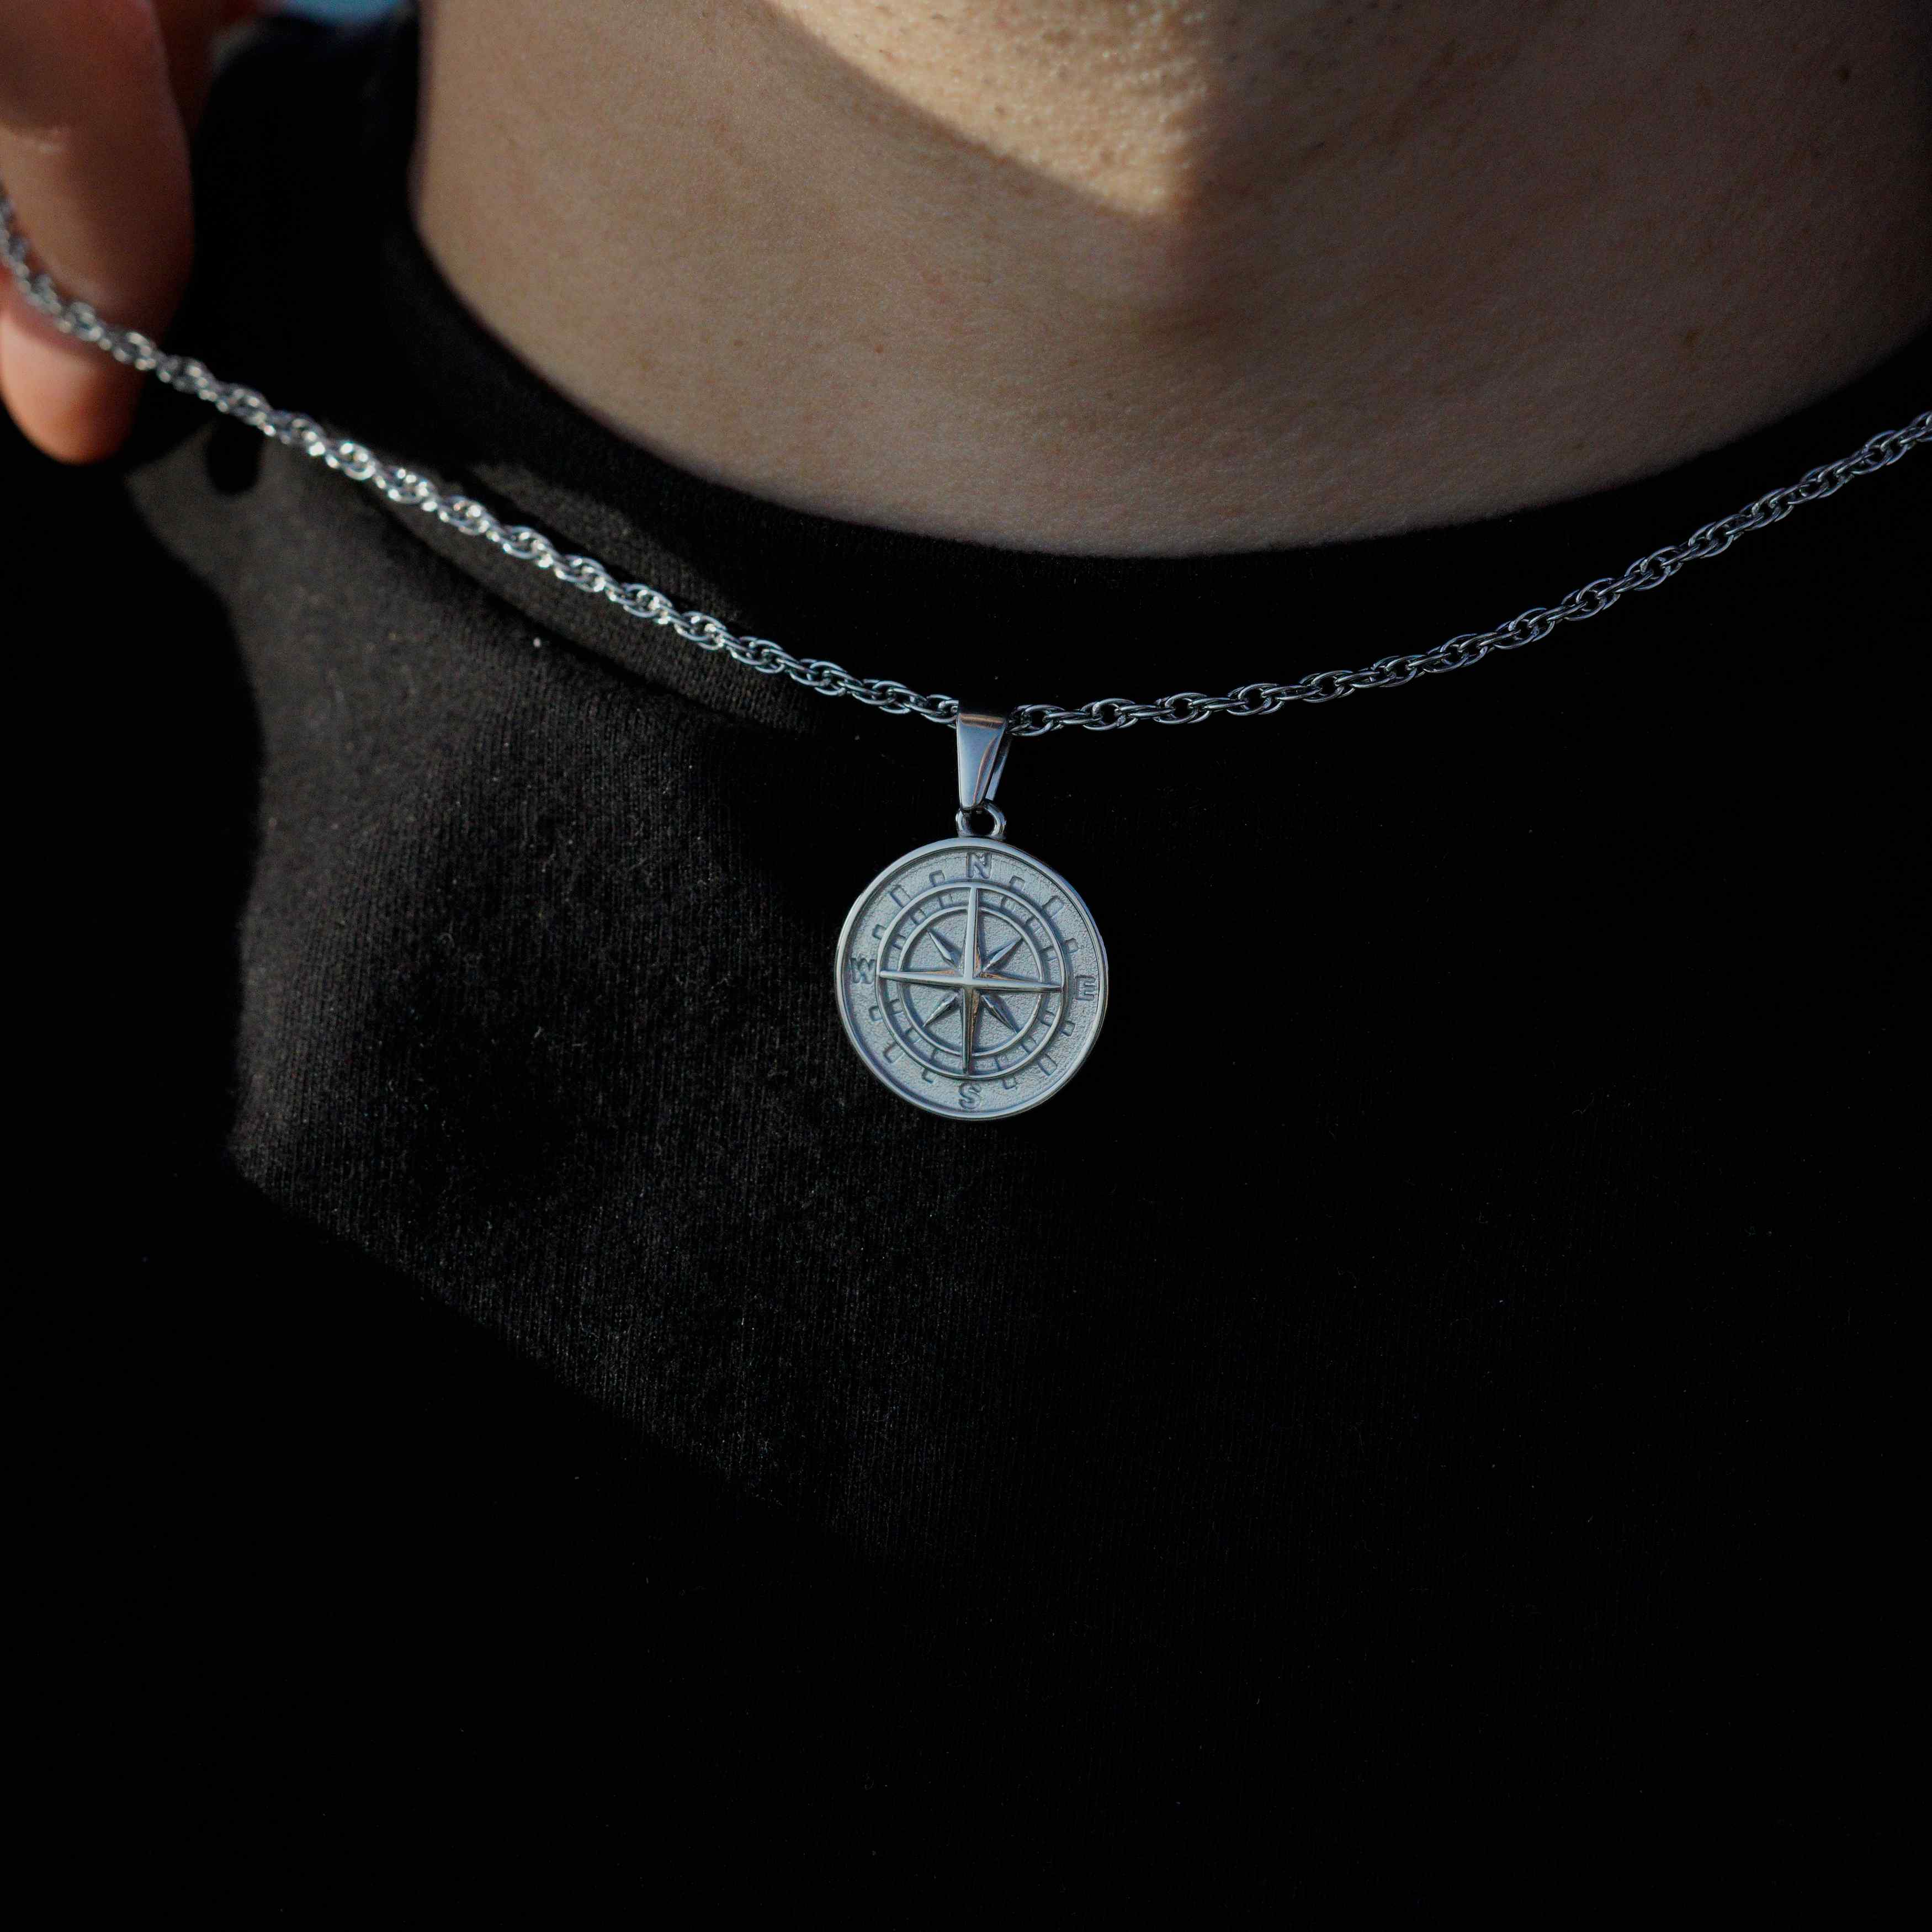 COMPASS NECKLACE - SILVER TONE